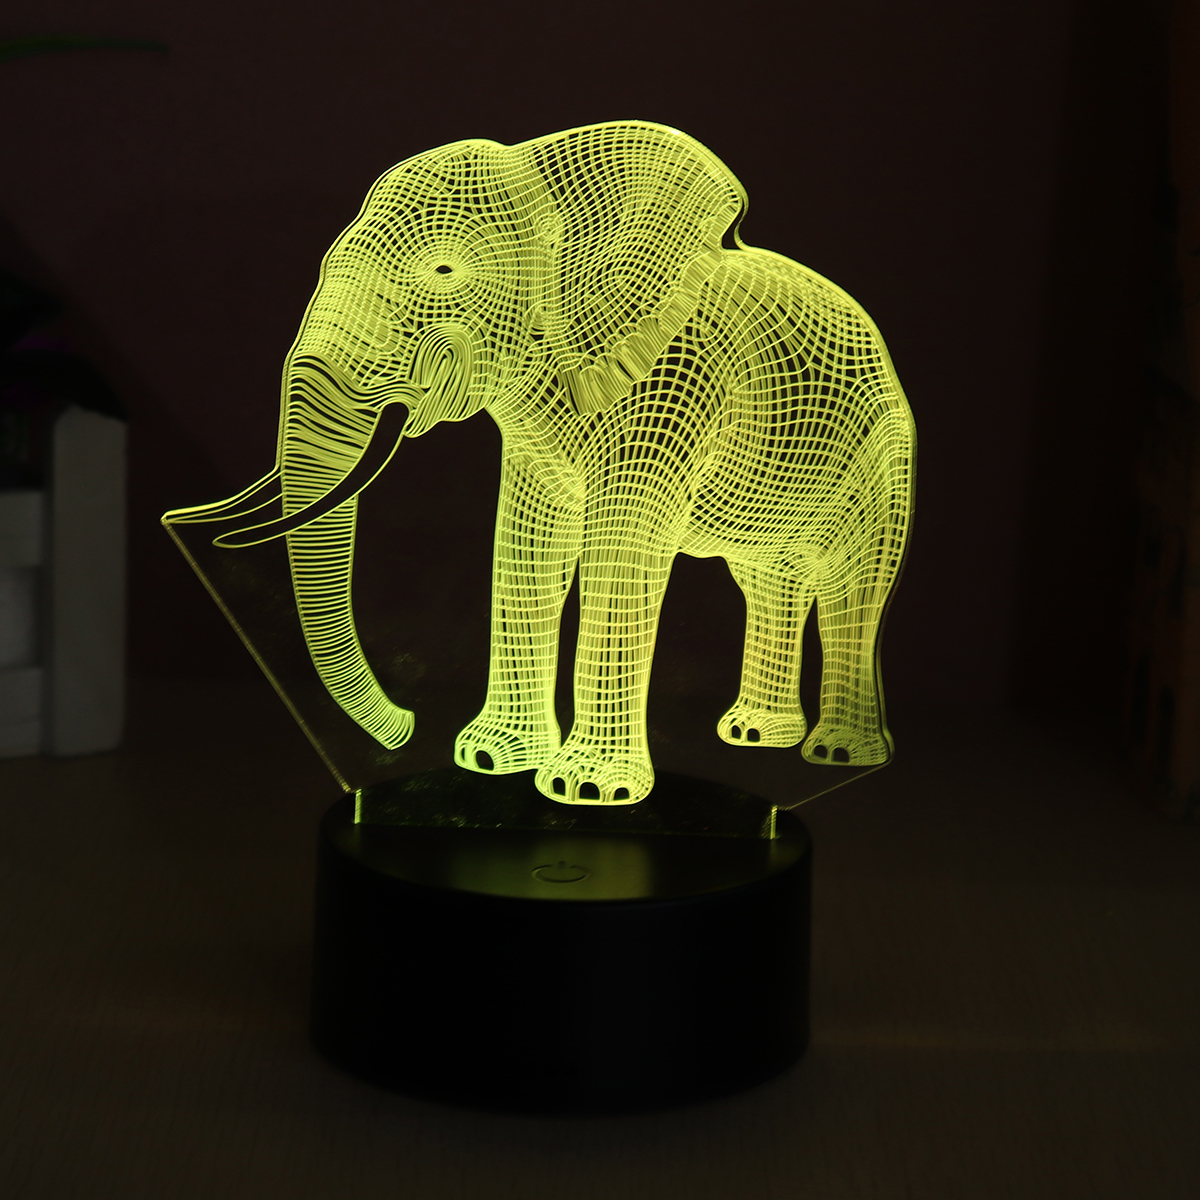 3D-Acrylic-LED-716-Colors-Colorful-Night-Lights-Elephant-Model-Remote-Control-Touch-Switch-Night-Lig-1370467-5